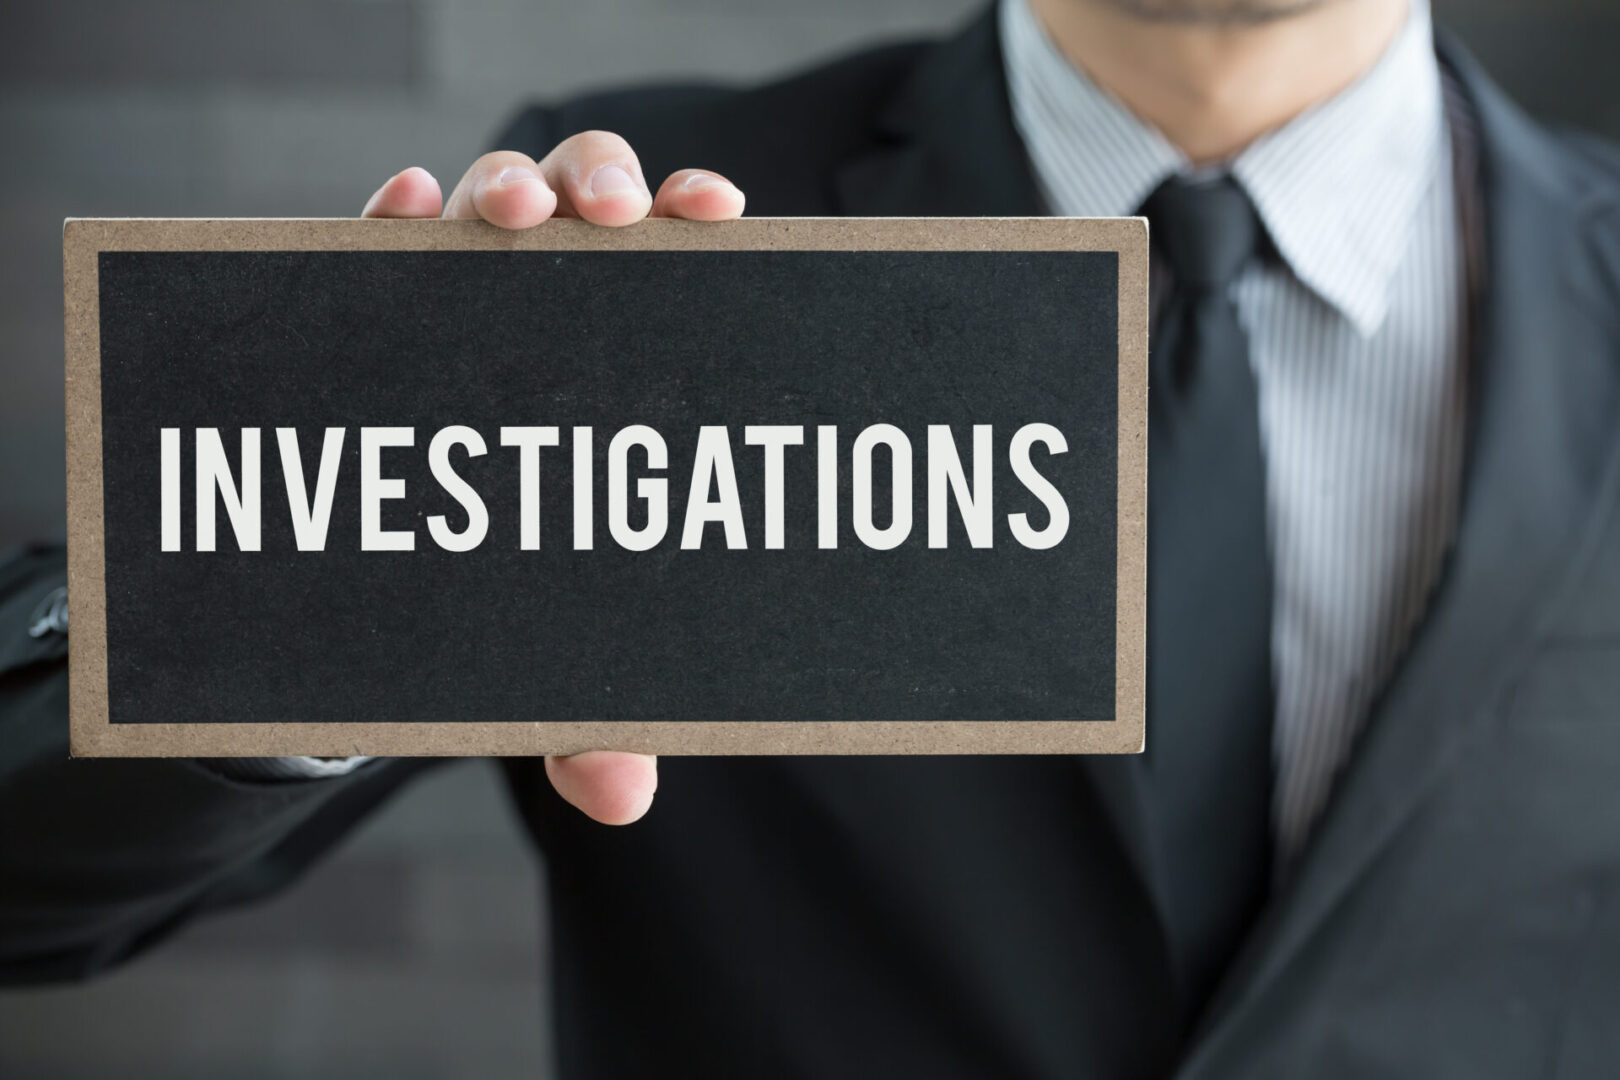 Investigations, message on blackboard and hold by businessman